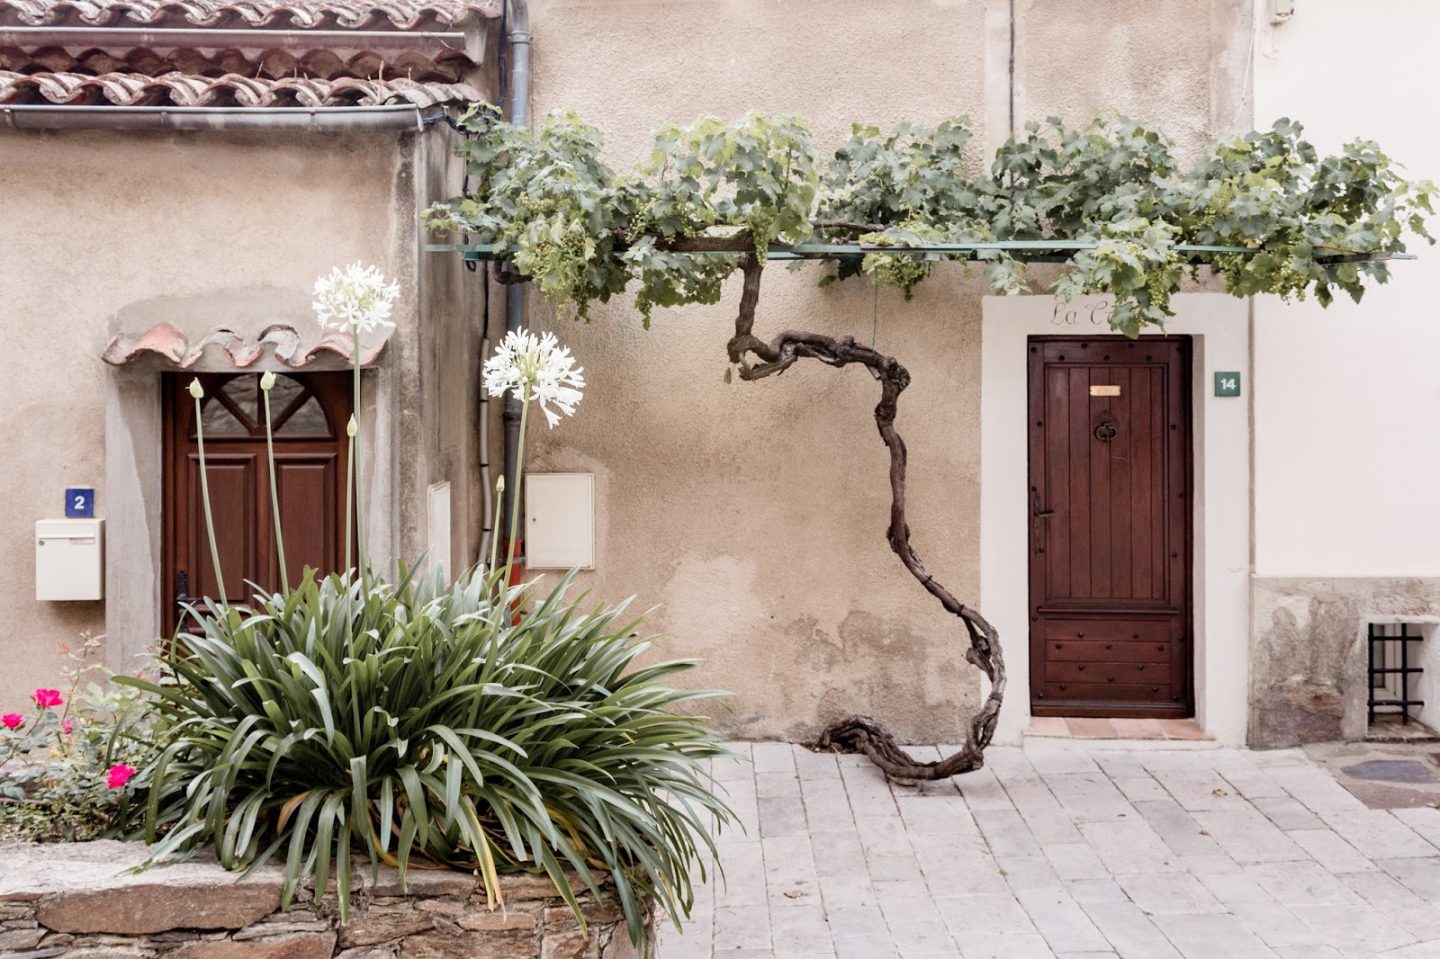 Rustic French Country Doors in Provence and gorgeous curb appeal with climbing vines, crumbling stone, and weathered age. Photo: The Flying Dutchwoman. #provence #southoffrance #exteriors #weathereddoors #rusticdoor #frenchcountryside #summerinfrance #frenchcountry #frenchfarmhouse #frontdoor #sttropez